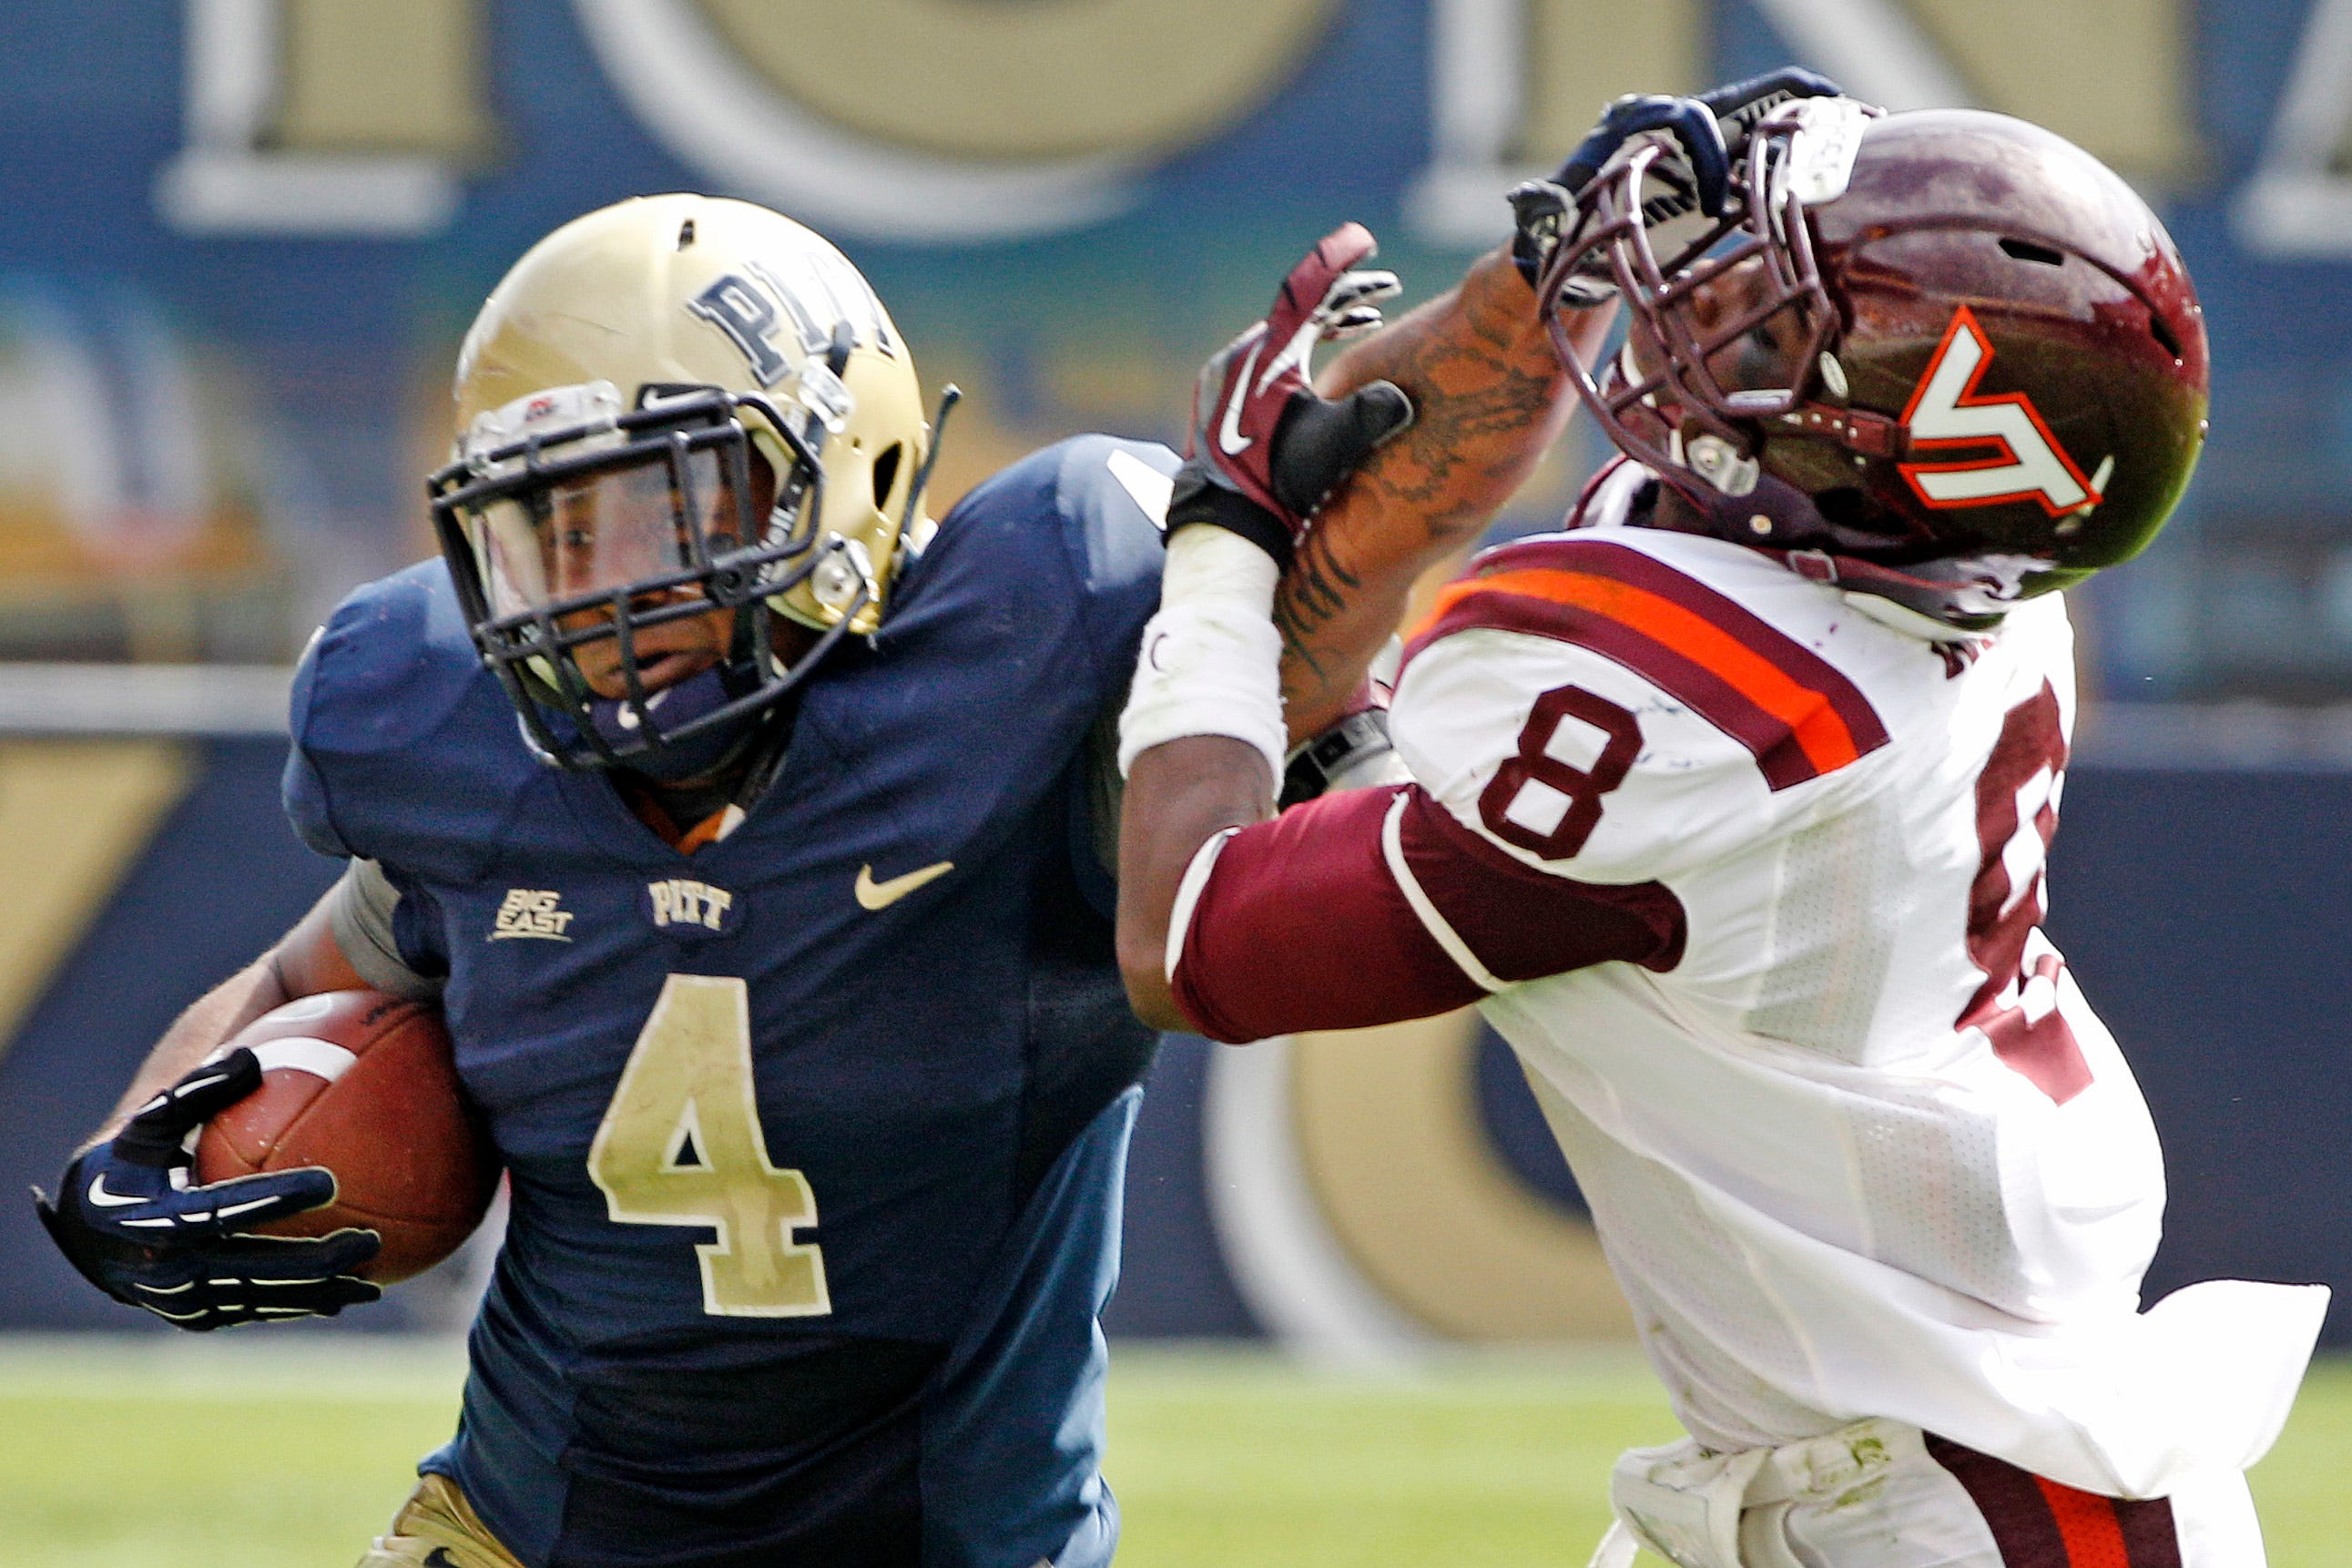 Pittsburgh running back Rushel Shell (4) stiff-arms Virginia Tech safety Detrick Bonner (8) during a game in 2012.